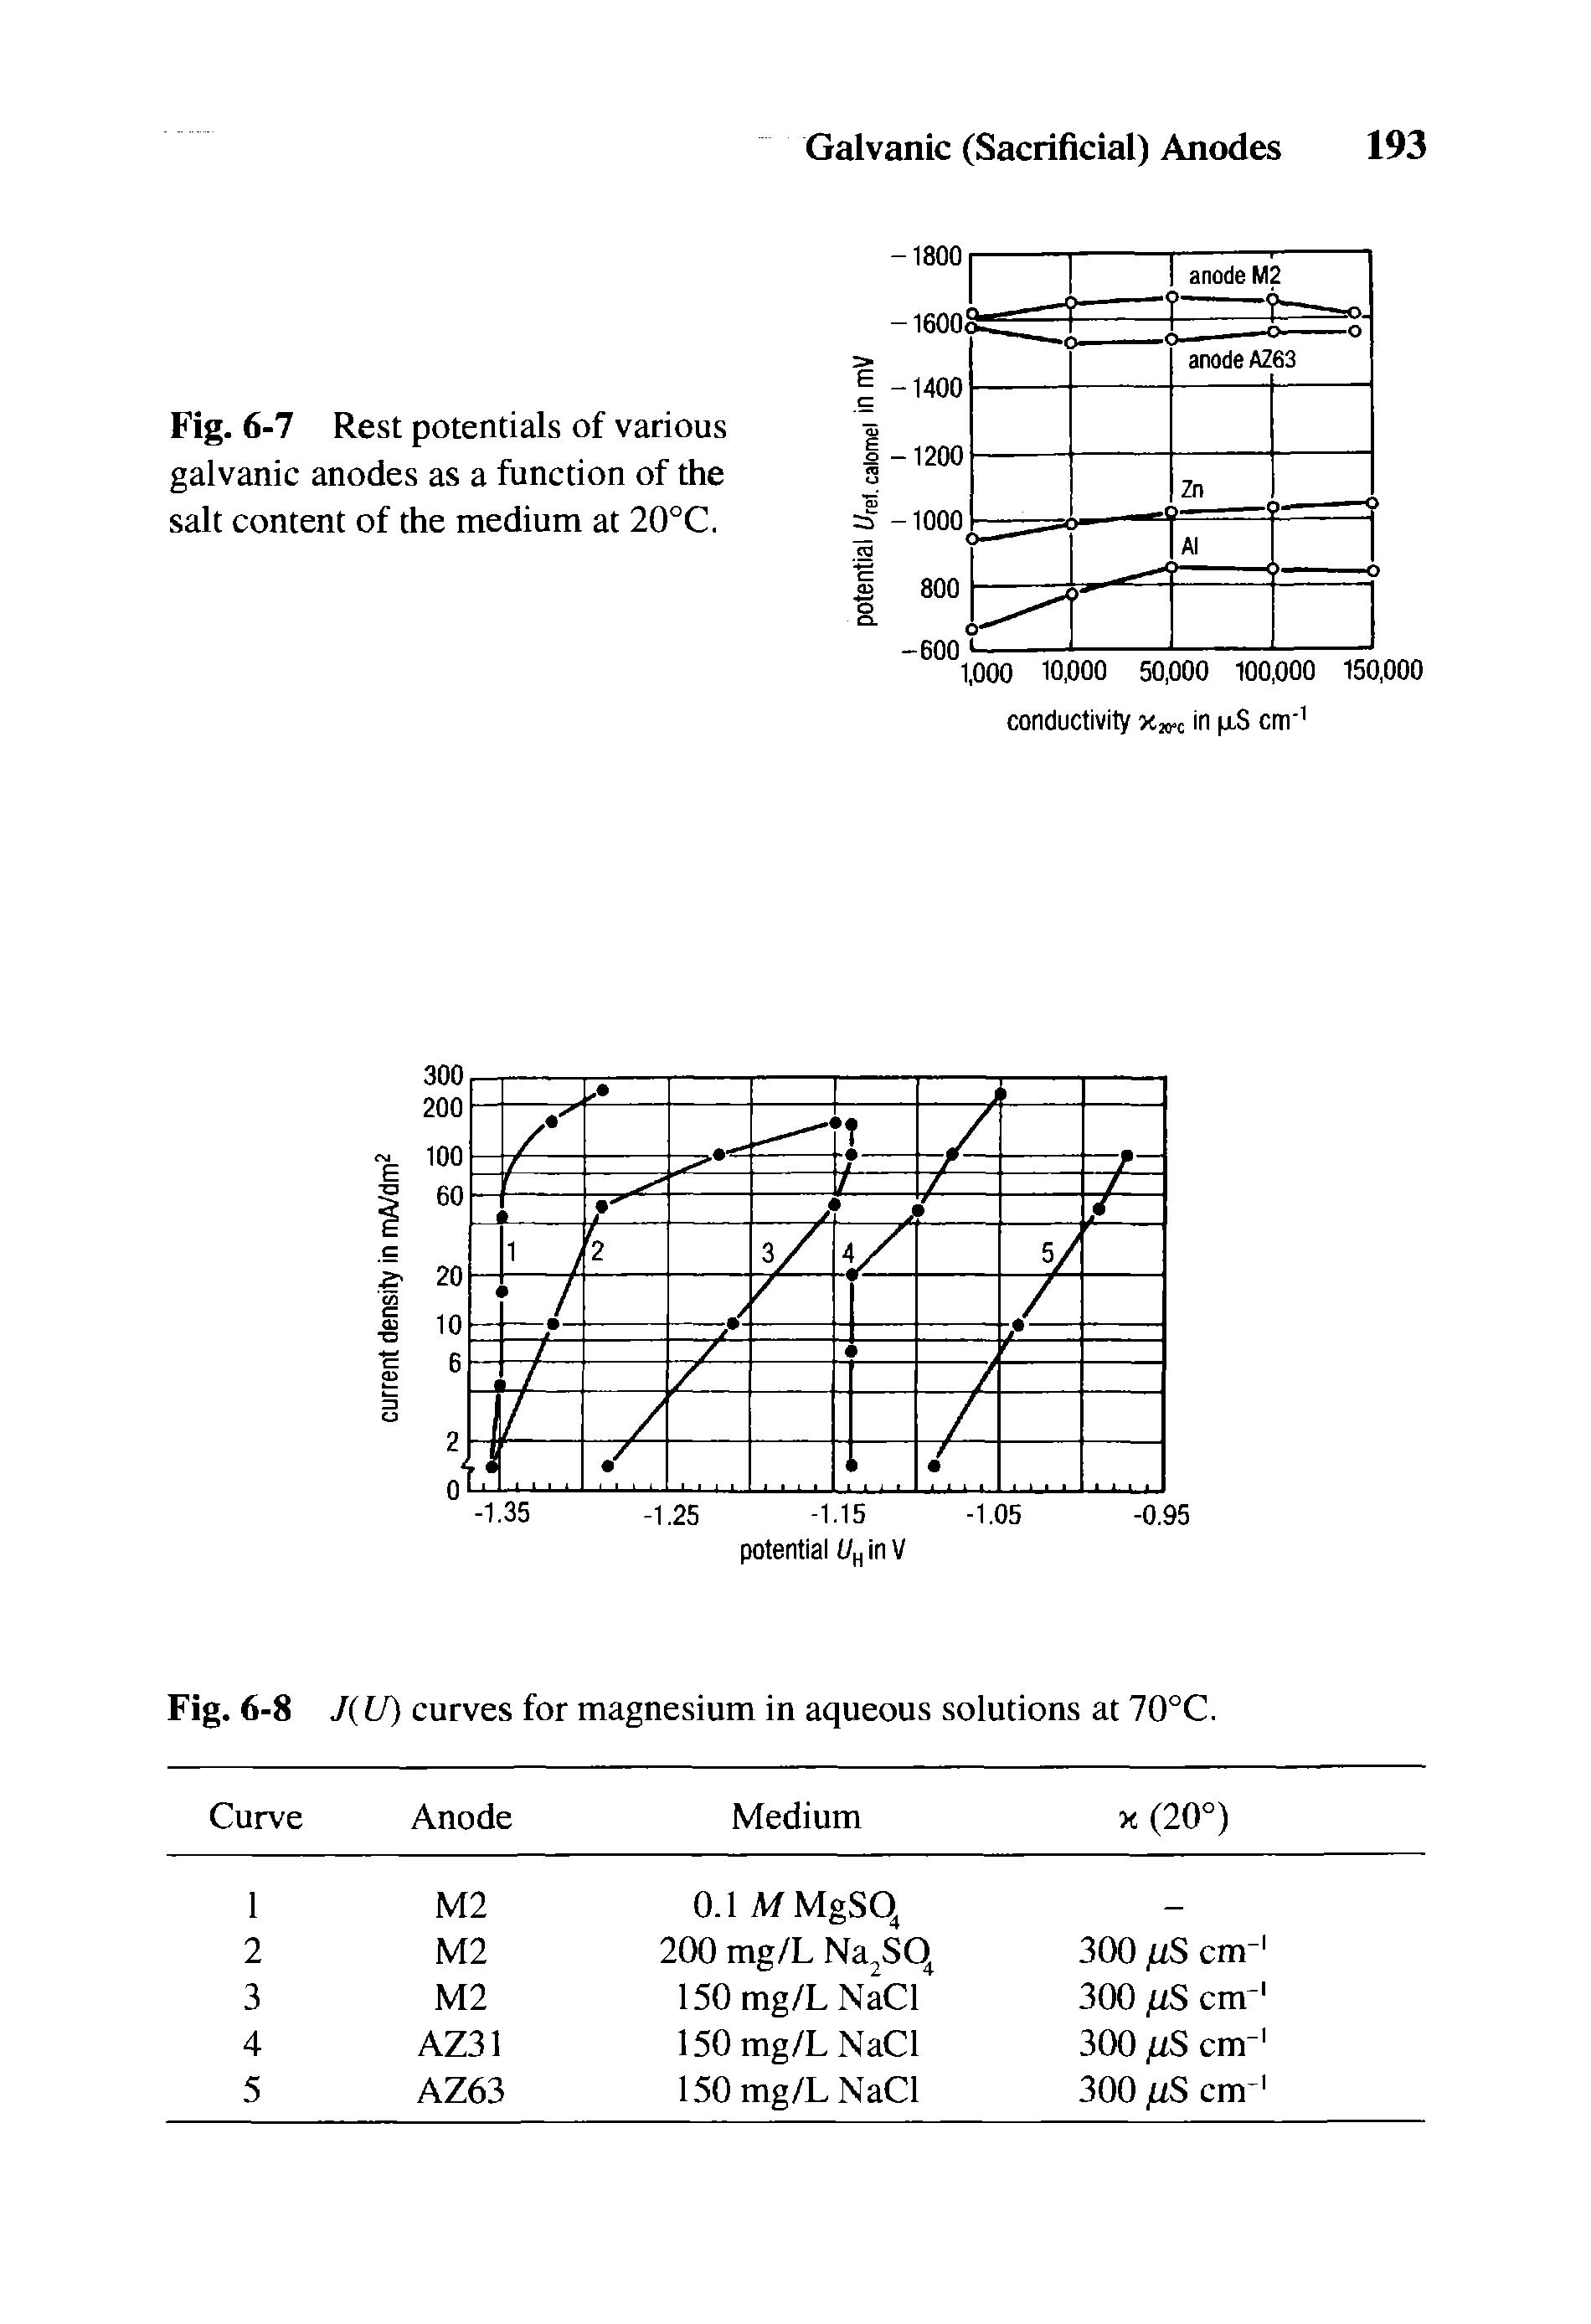 Fig. 6-7 Rest potentials of various galvanic anodes as a function of the salt content of the medium at 20°C.